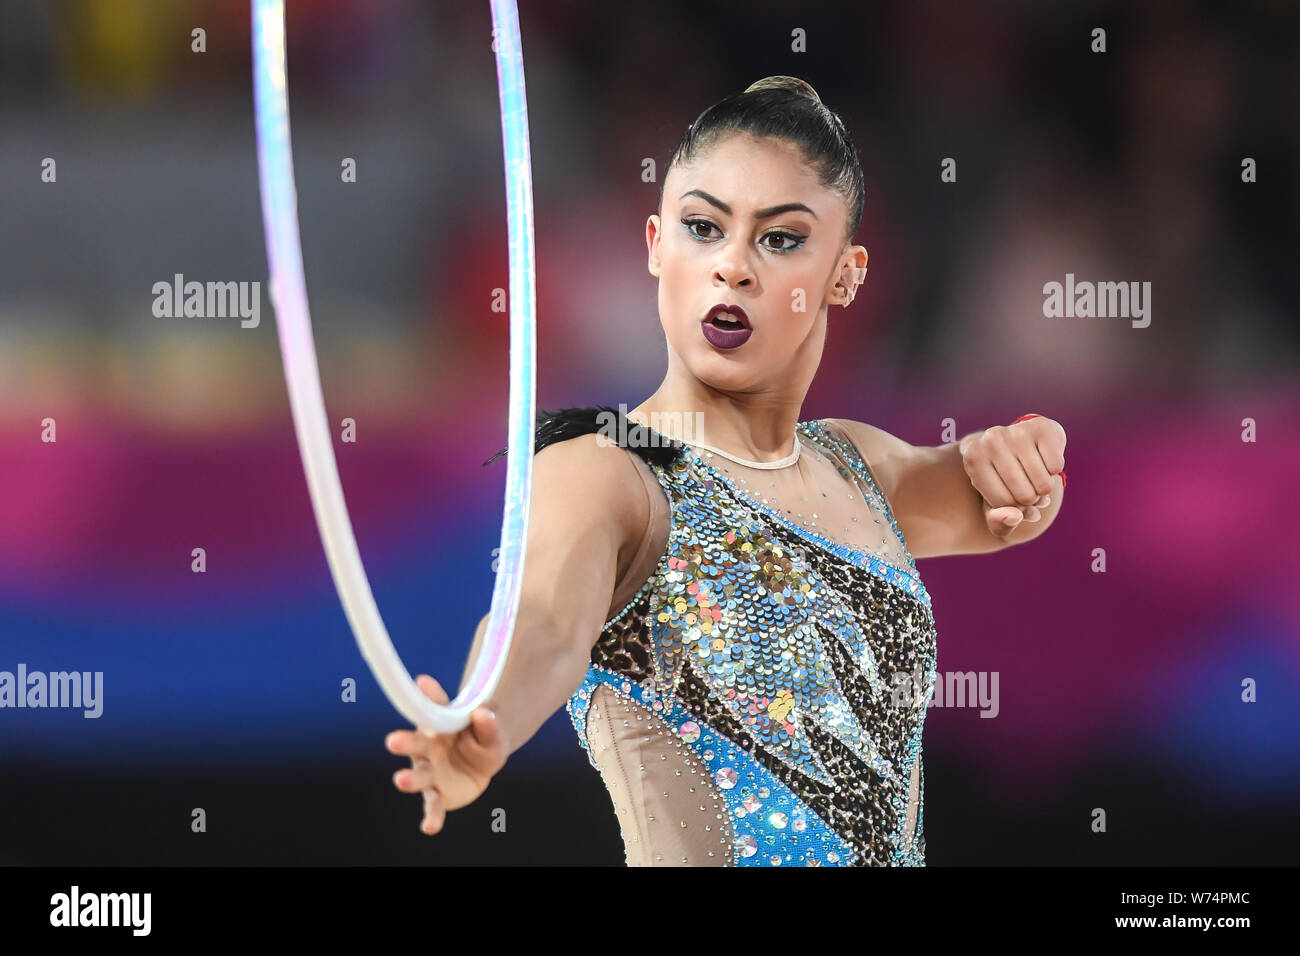 Lima, Peru. 4th Aug, 2019. BARBARA DOMINGOS from Brazil rolls the hoop down her arm during the competition held in the Polideportivo Villa El Salvador in Lima, Peru. Credit: Amy Sanderson/ZUMA Wire/Alamy Live News Stock Photo